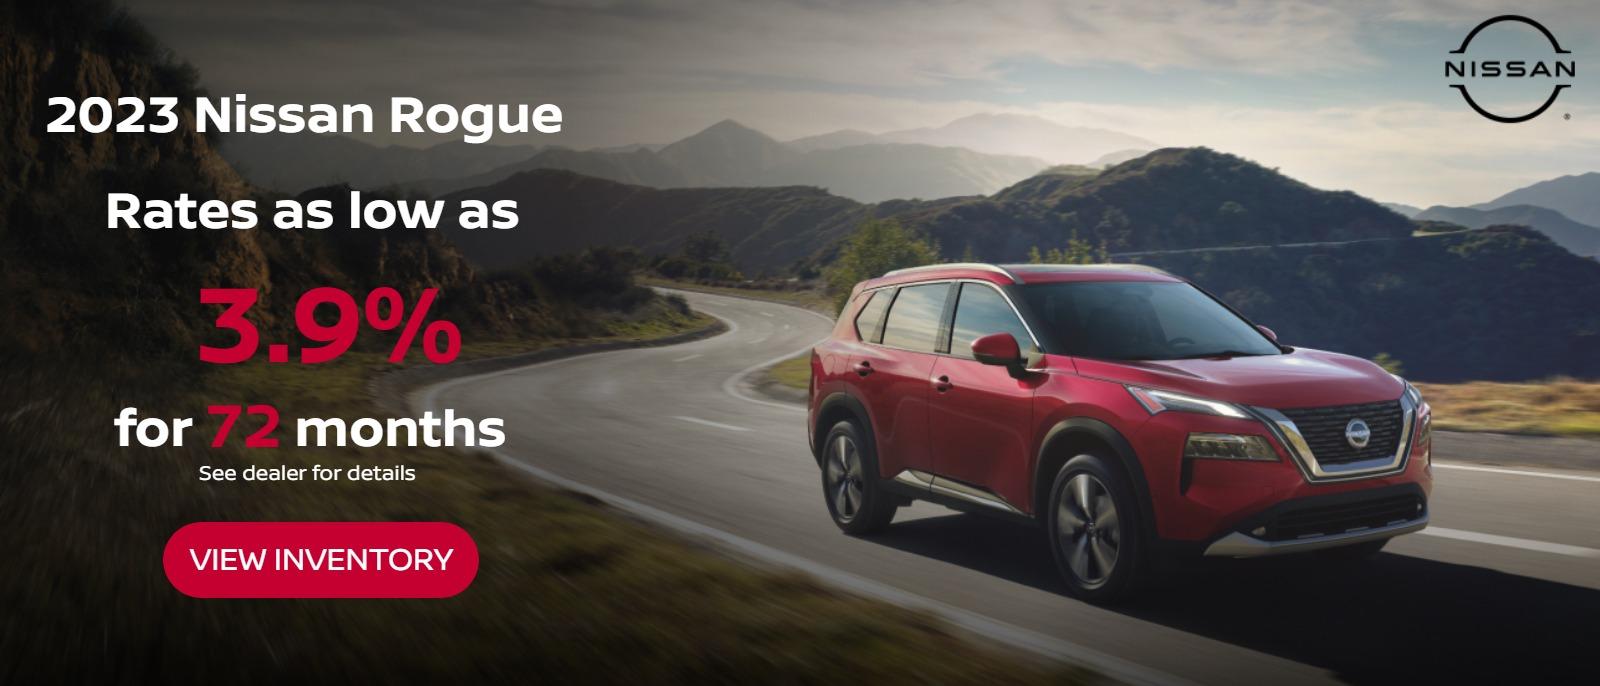 2023 Nissan Rogue
Rates as low as 3.9% for 72 months
*see dealer for details